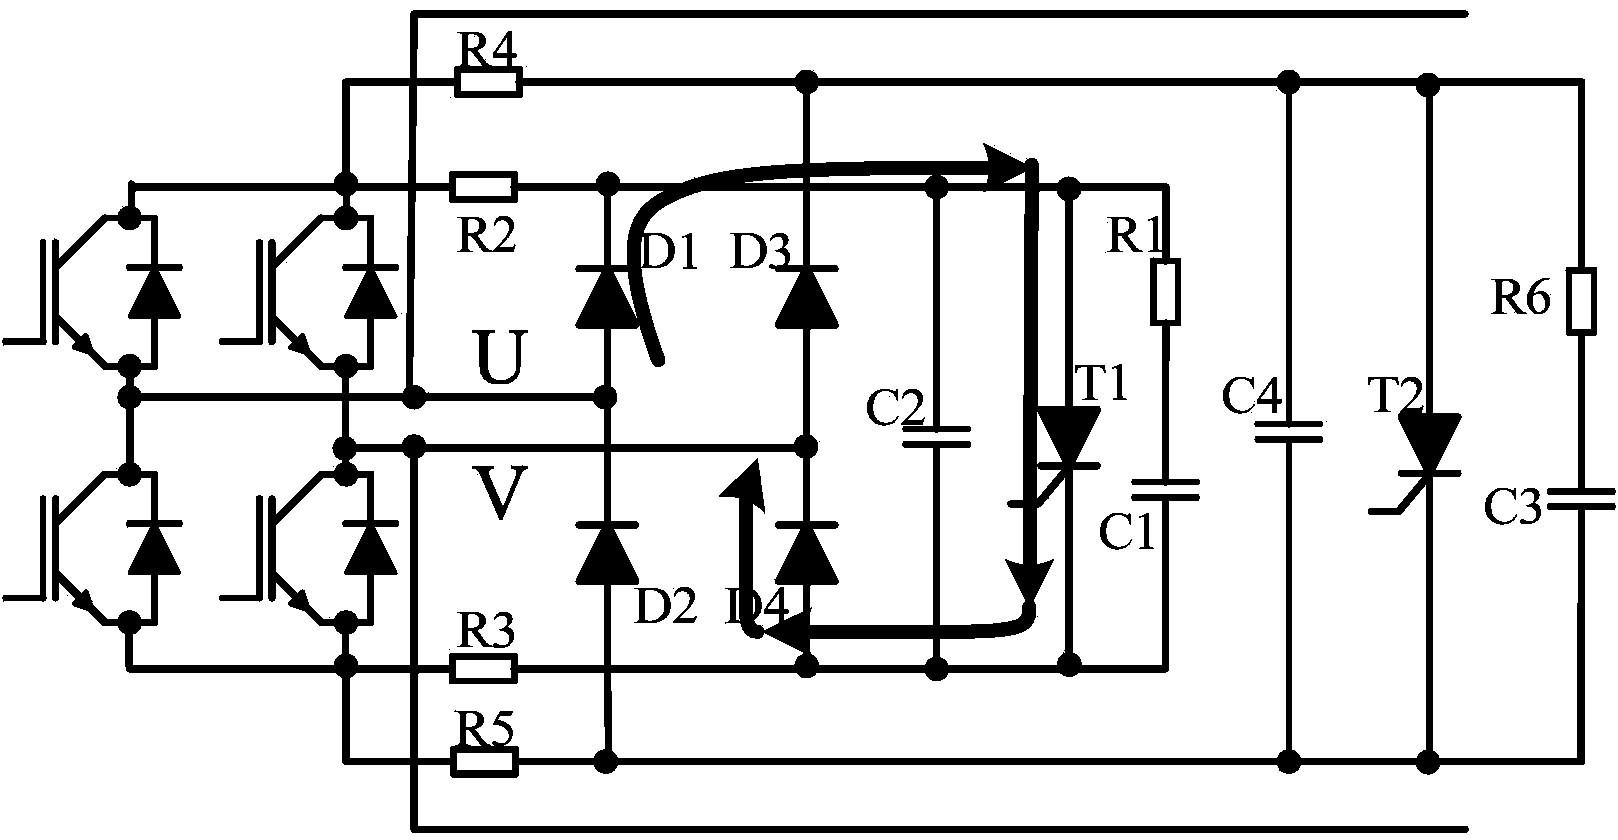 Current-sharing bypass circuit of power unit of high-voltage inverter